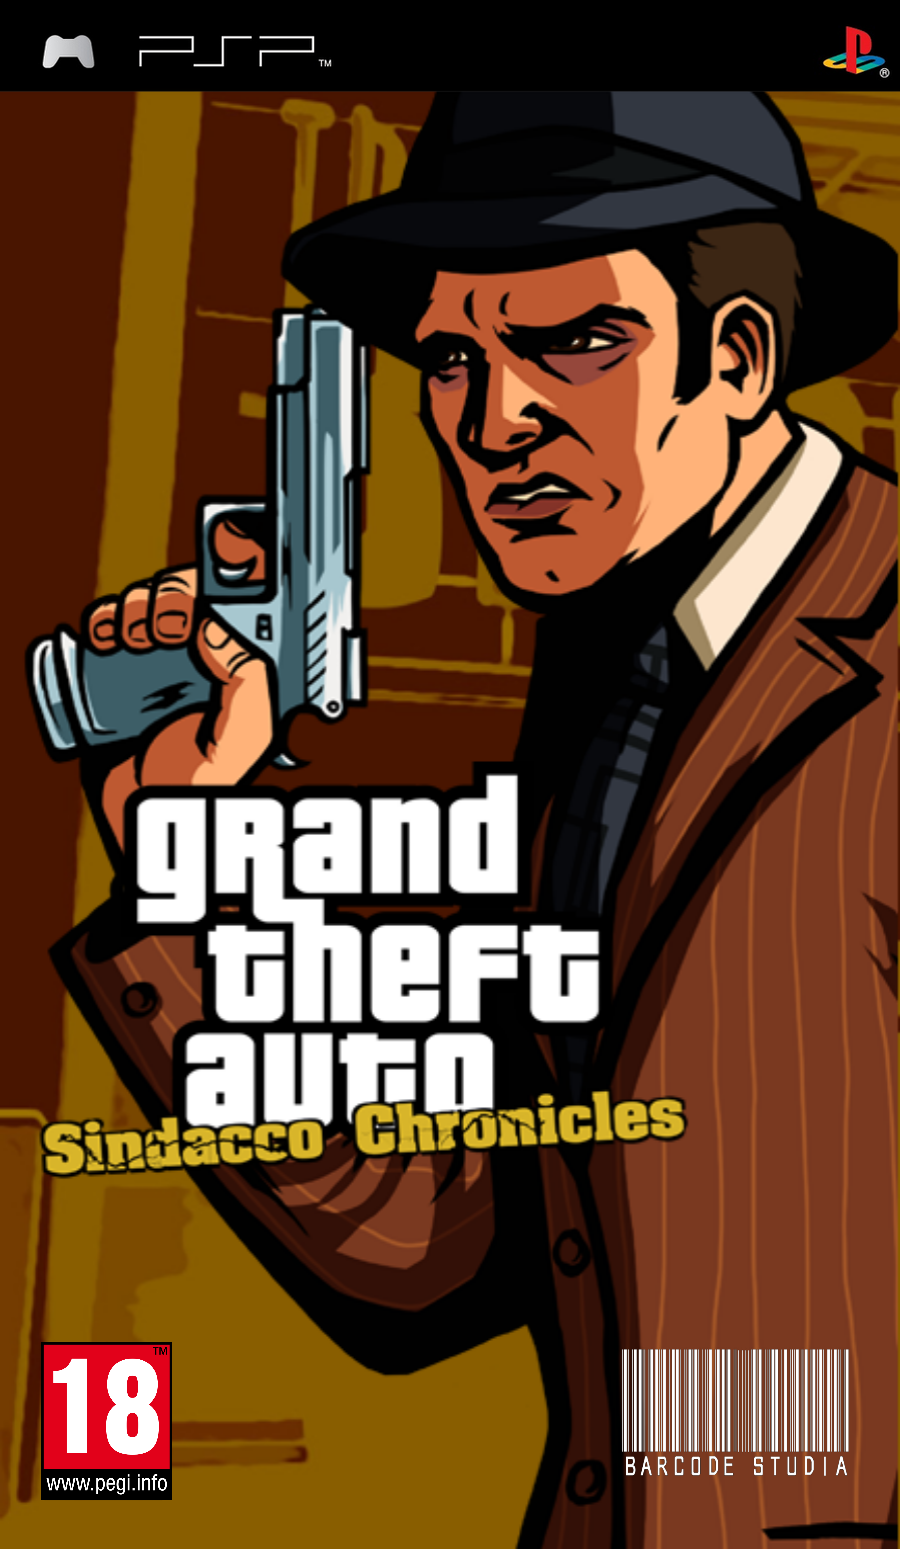 Download Grand Theft Auto - Forelli Redemption: PS2 Edition for GTA 3